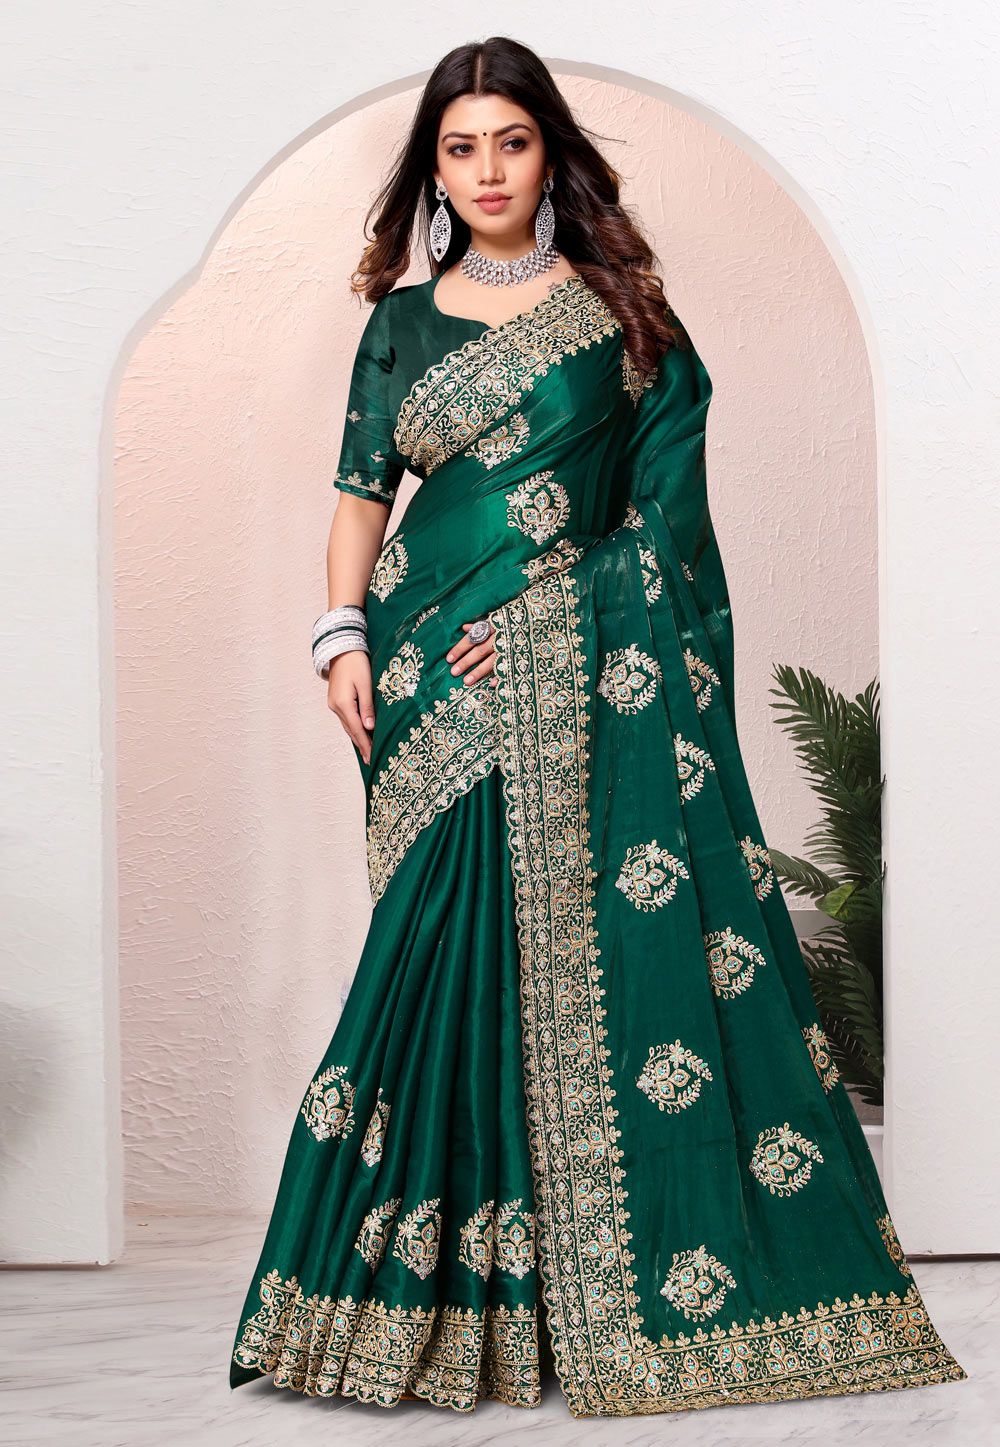 Green Crepe Silk Saree With Blouse 282860